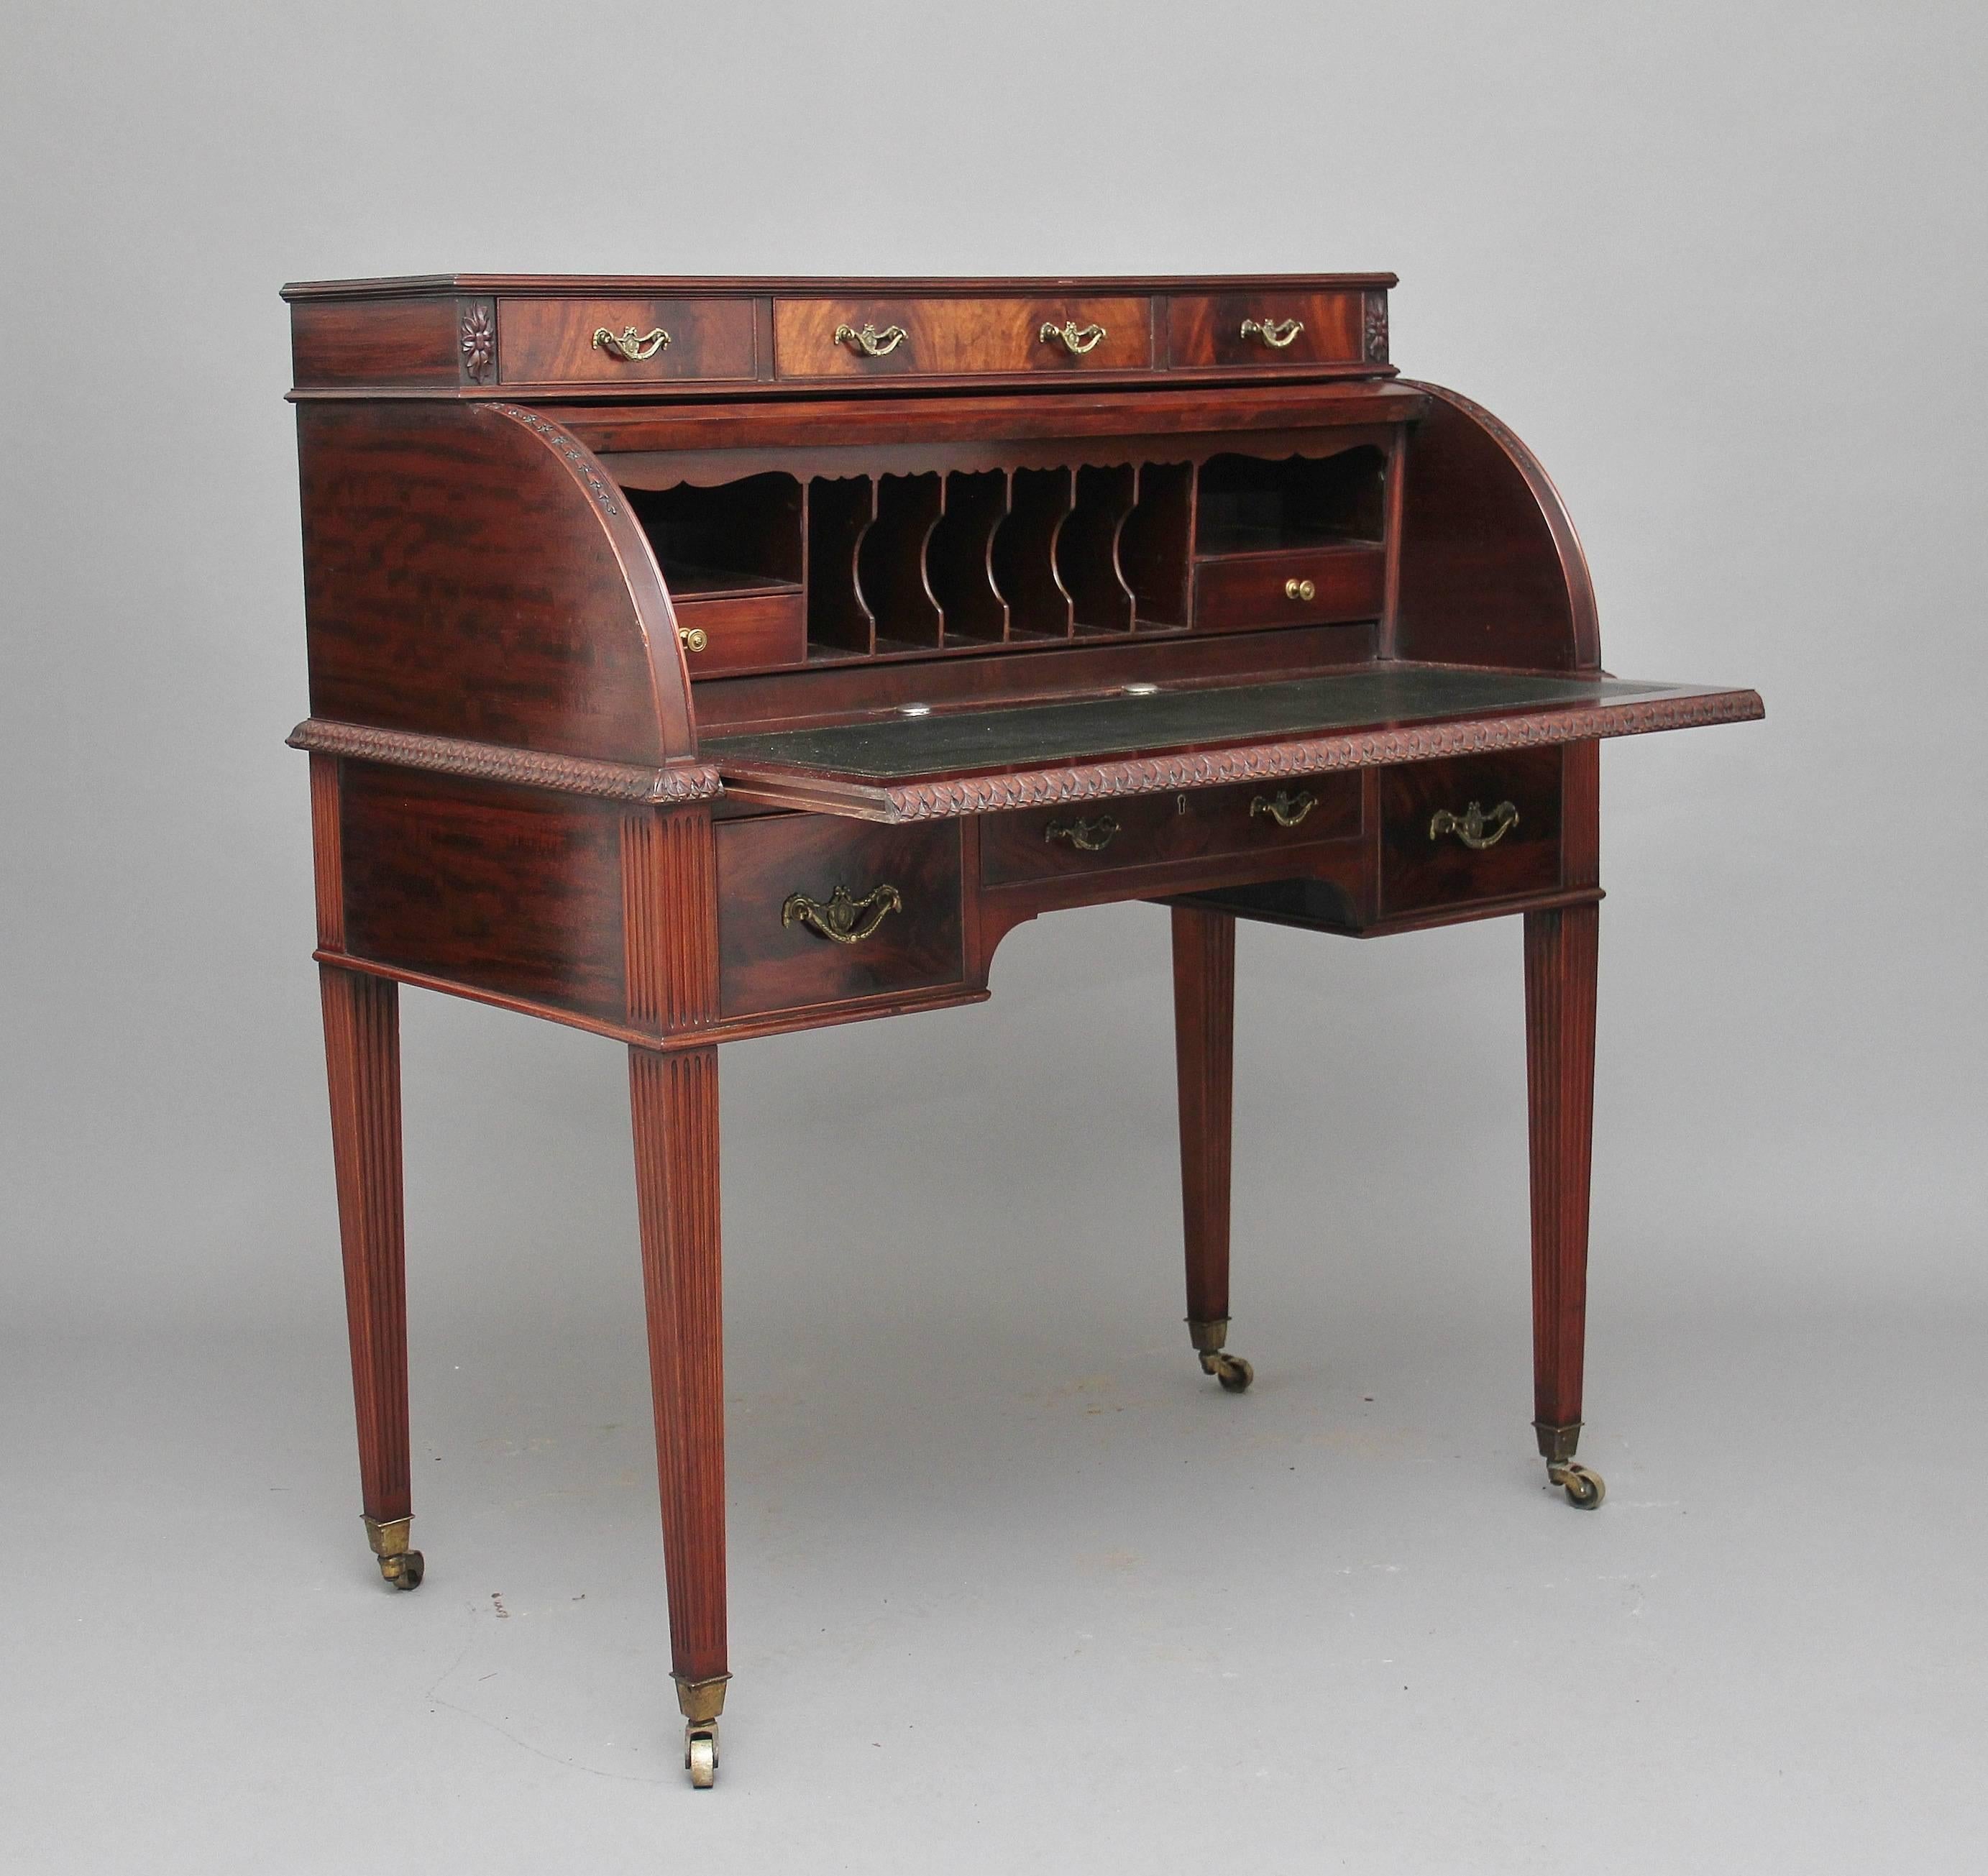 Early 20th century mahogany cylinder desk, the top structure having three drawers above the cylinder which are automatically locked once the cylinder is closed, with a lovely fitted interior inside with various compartments and drawers, with a